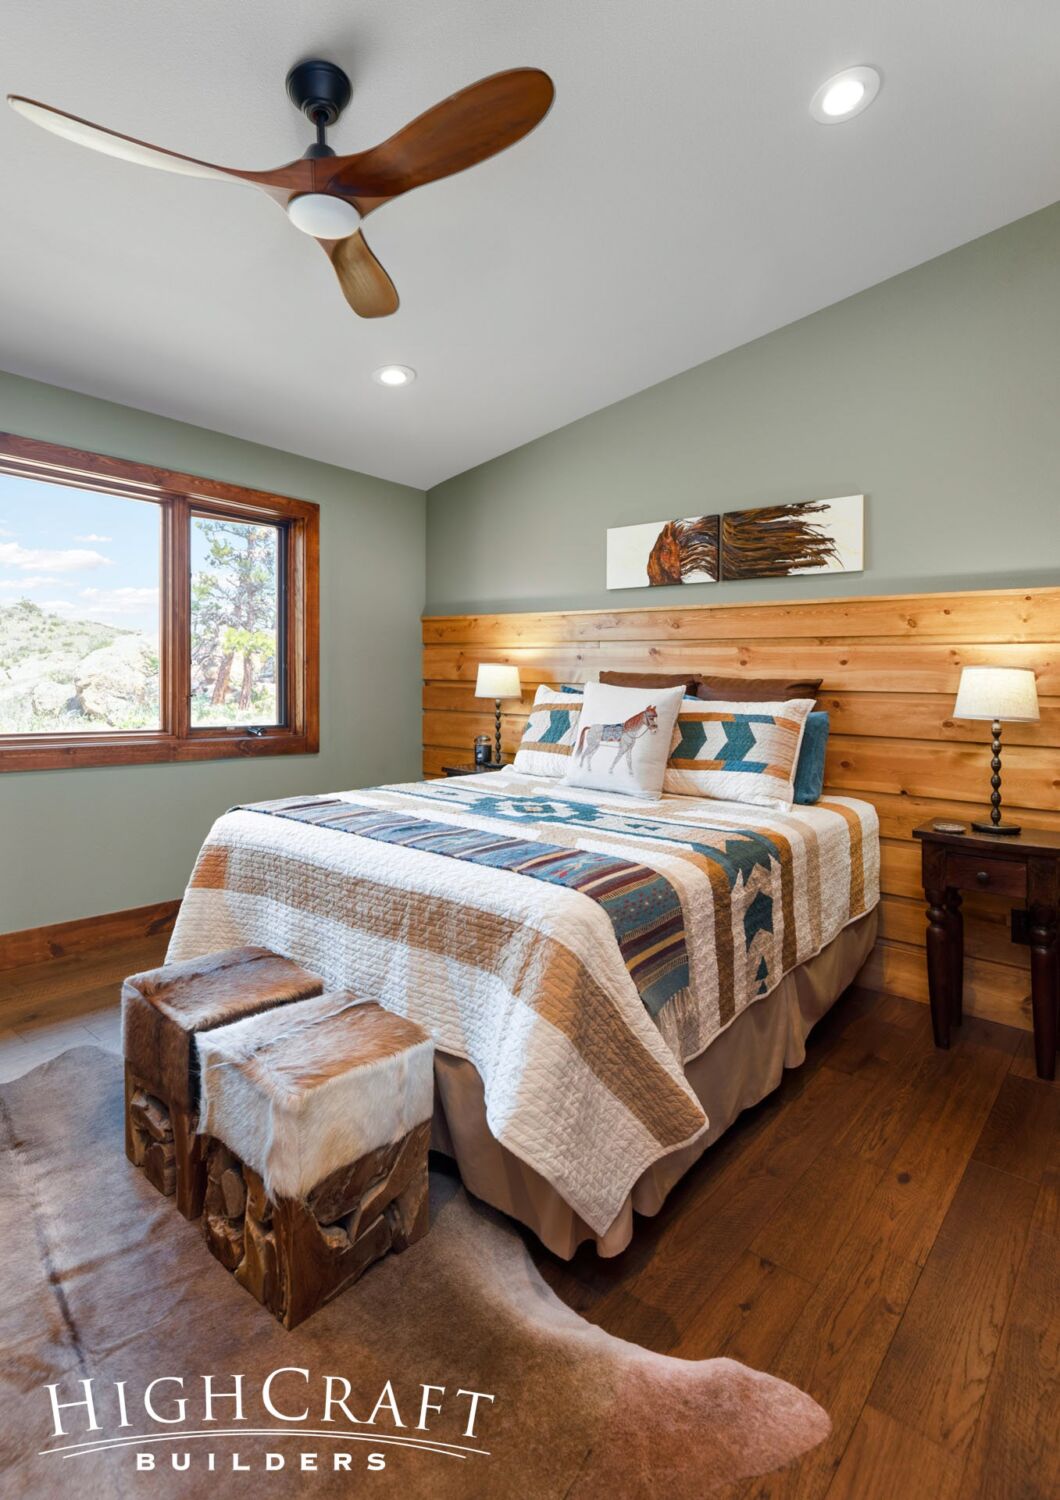 Master-Suite-Addition-Guest-Bedroom-Wainscoting-Paneled-Wall